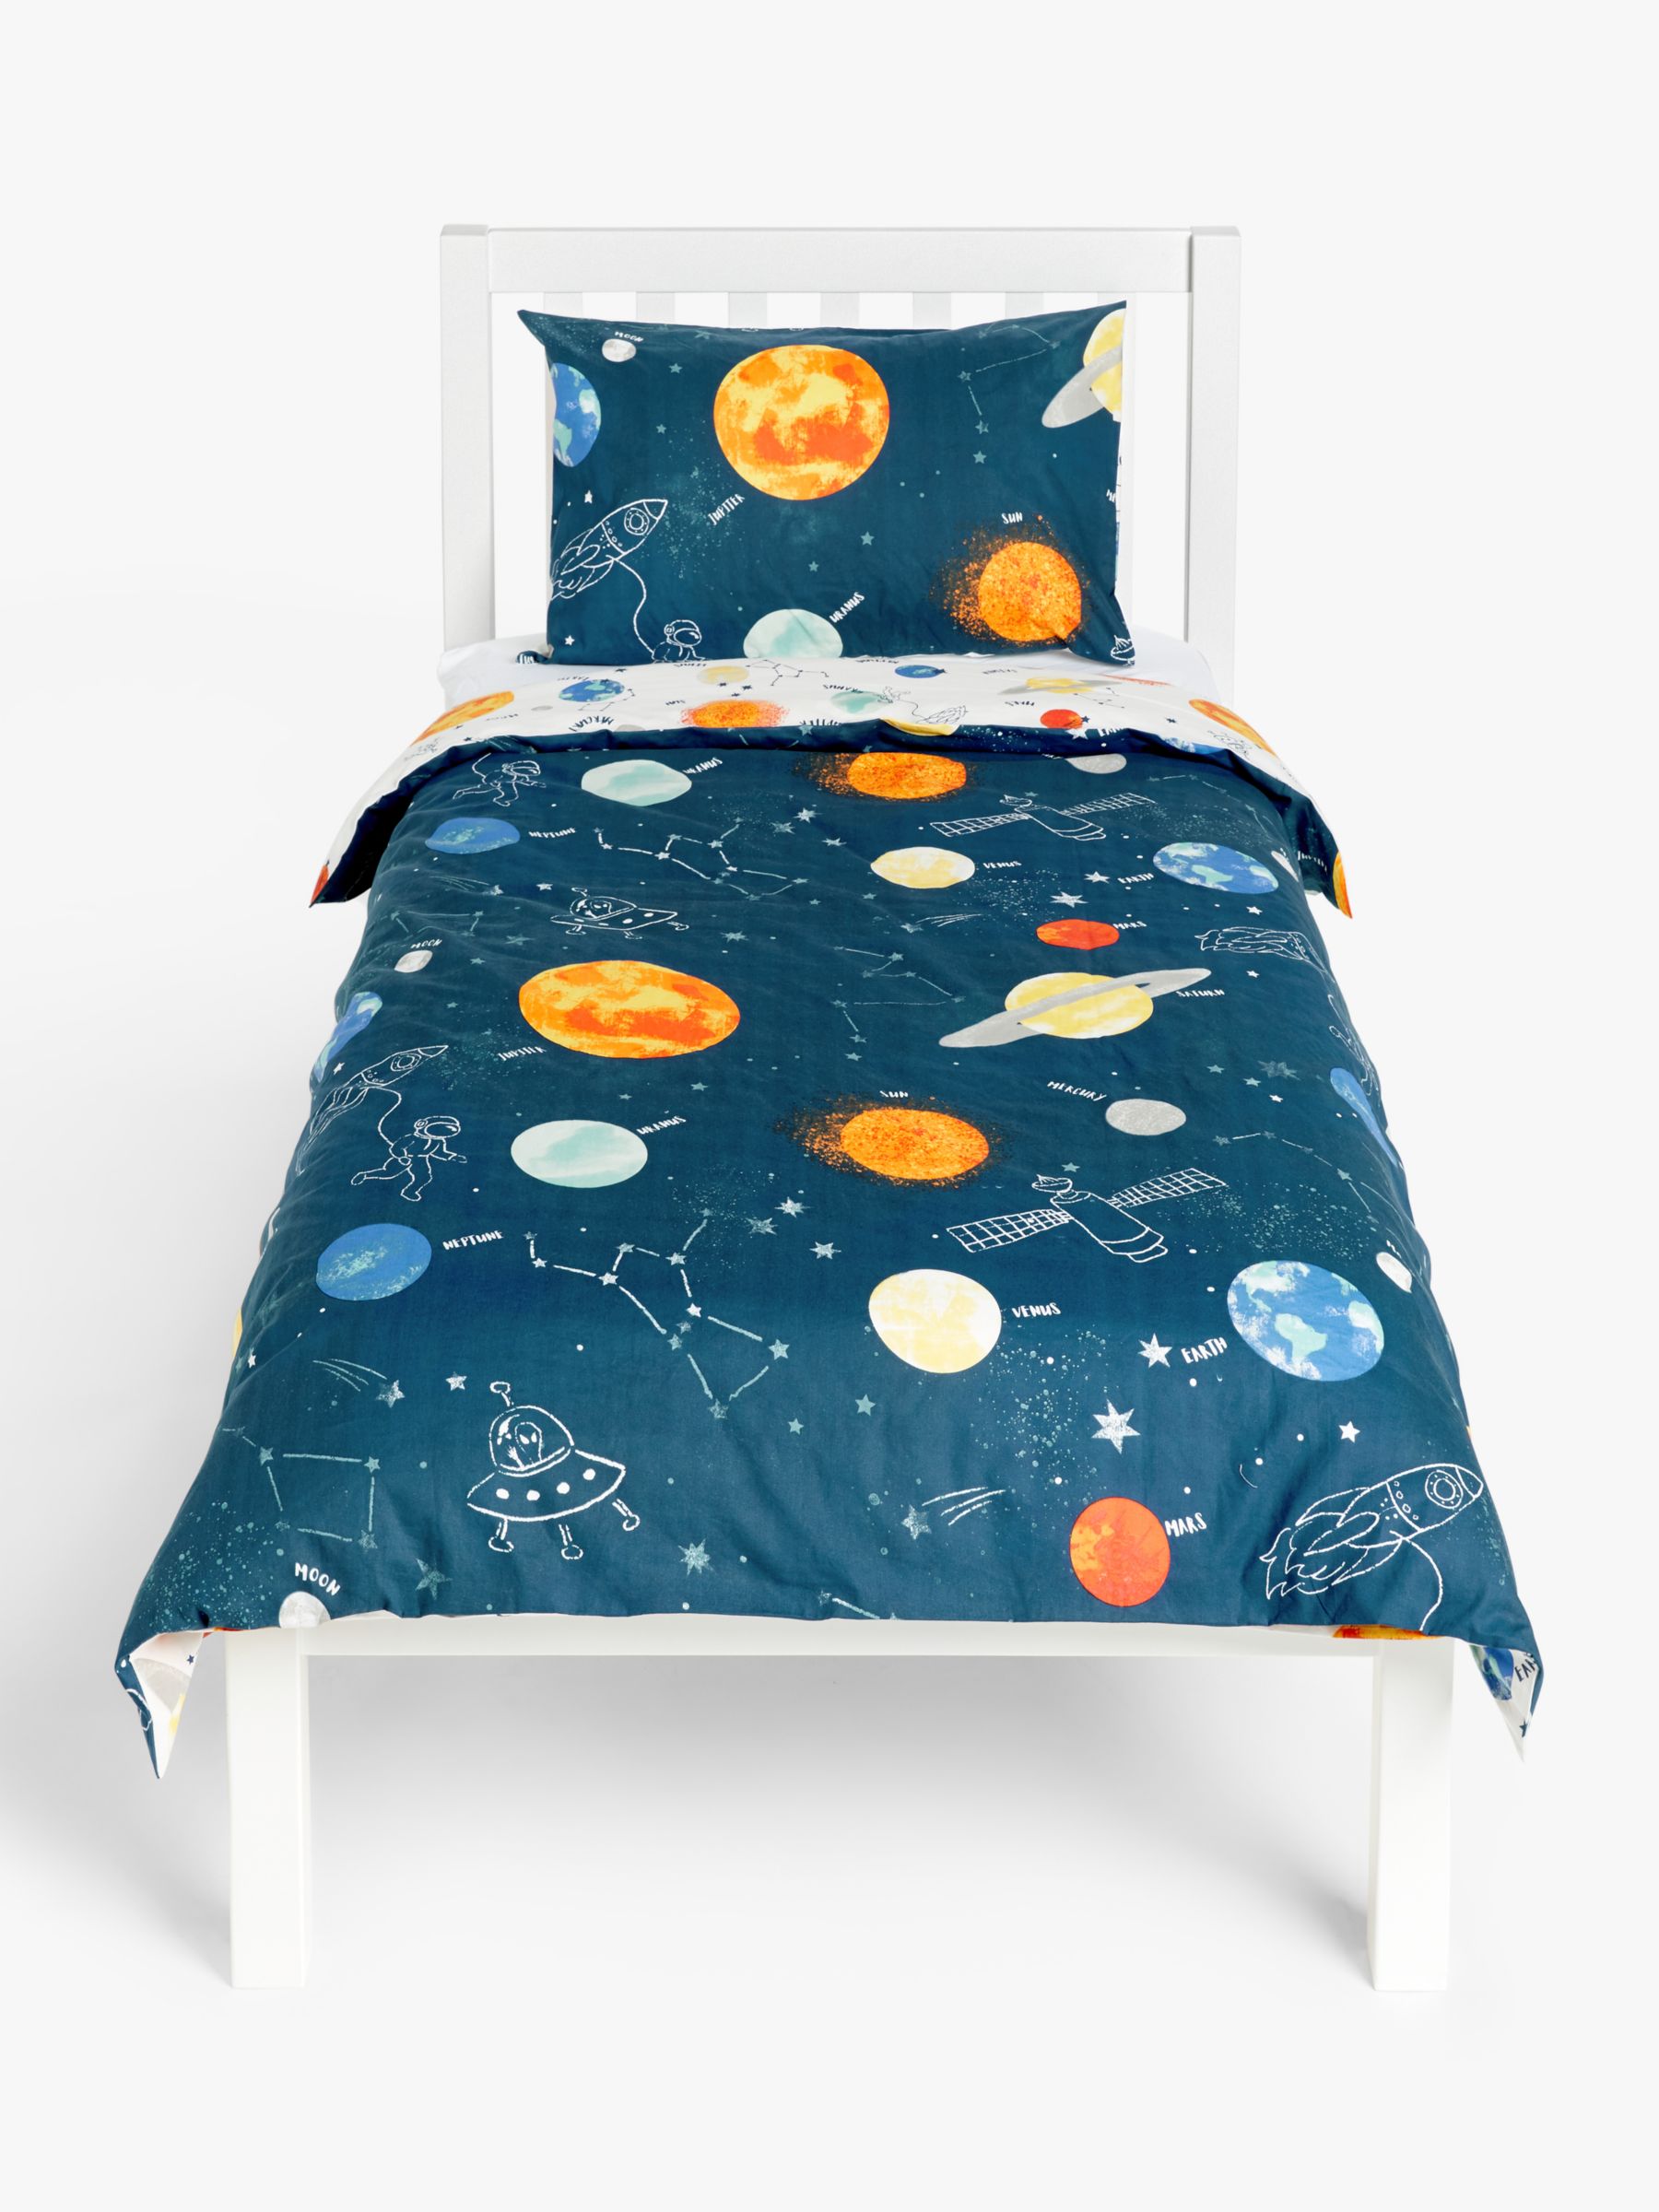 outer space bed set